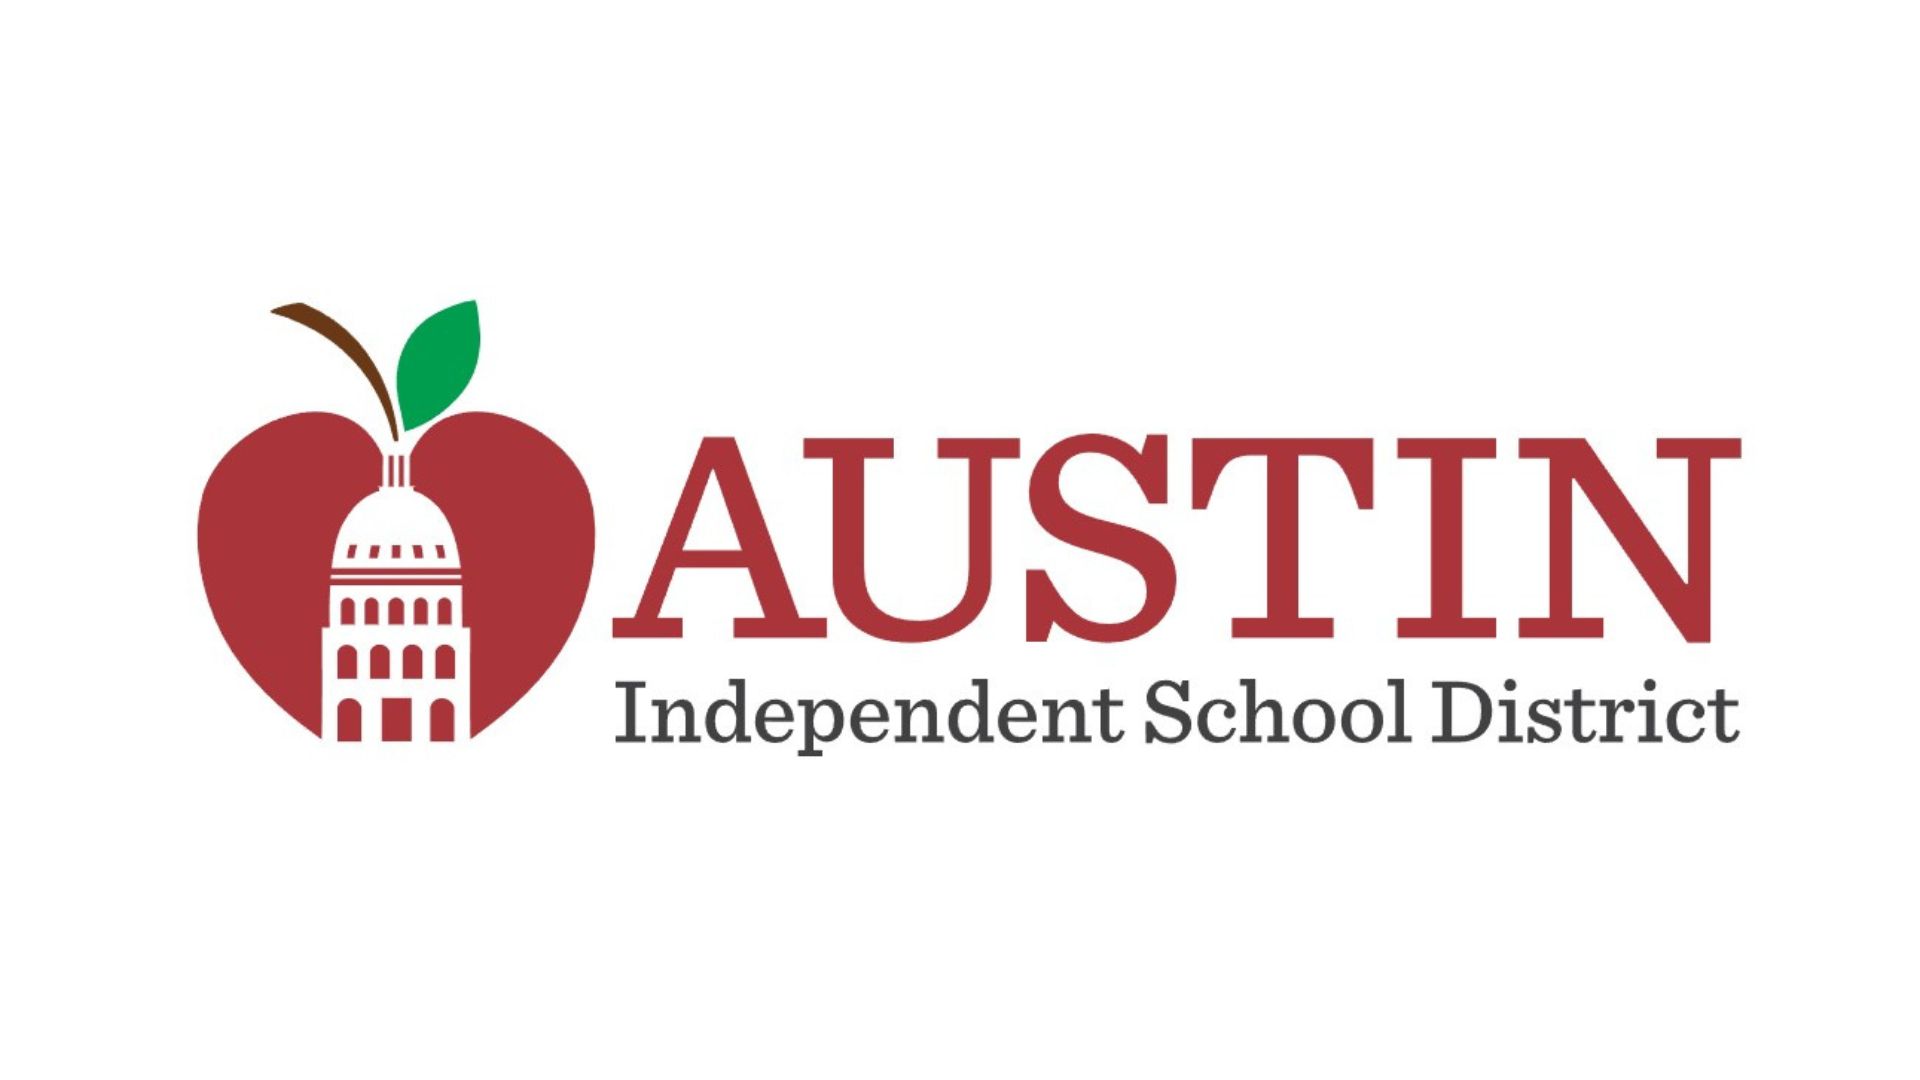 The Austin Independent School District is making huge steps toward financial stability